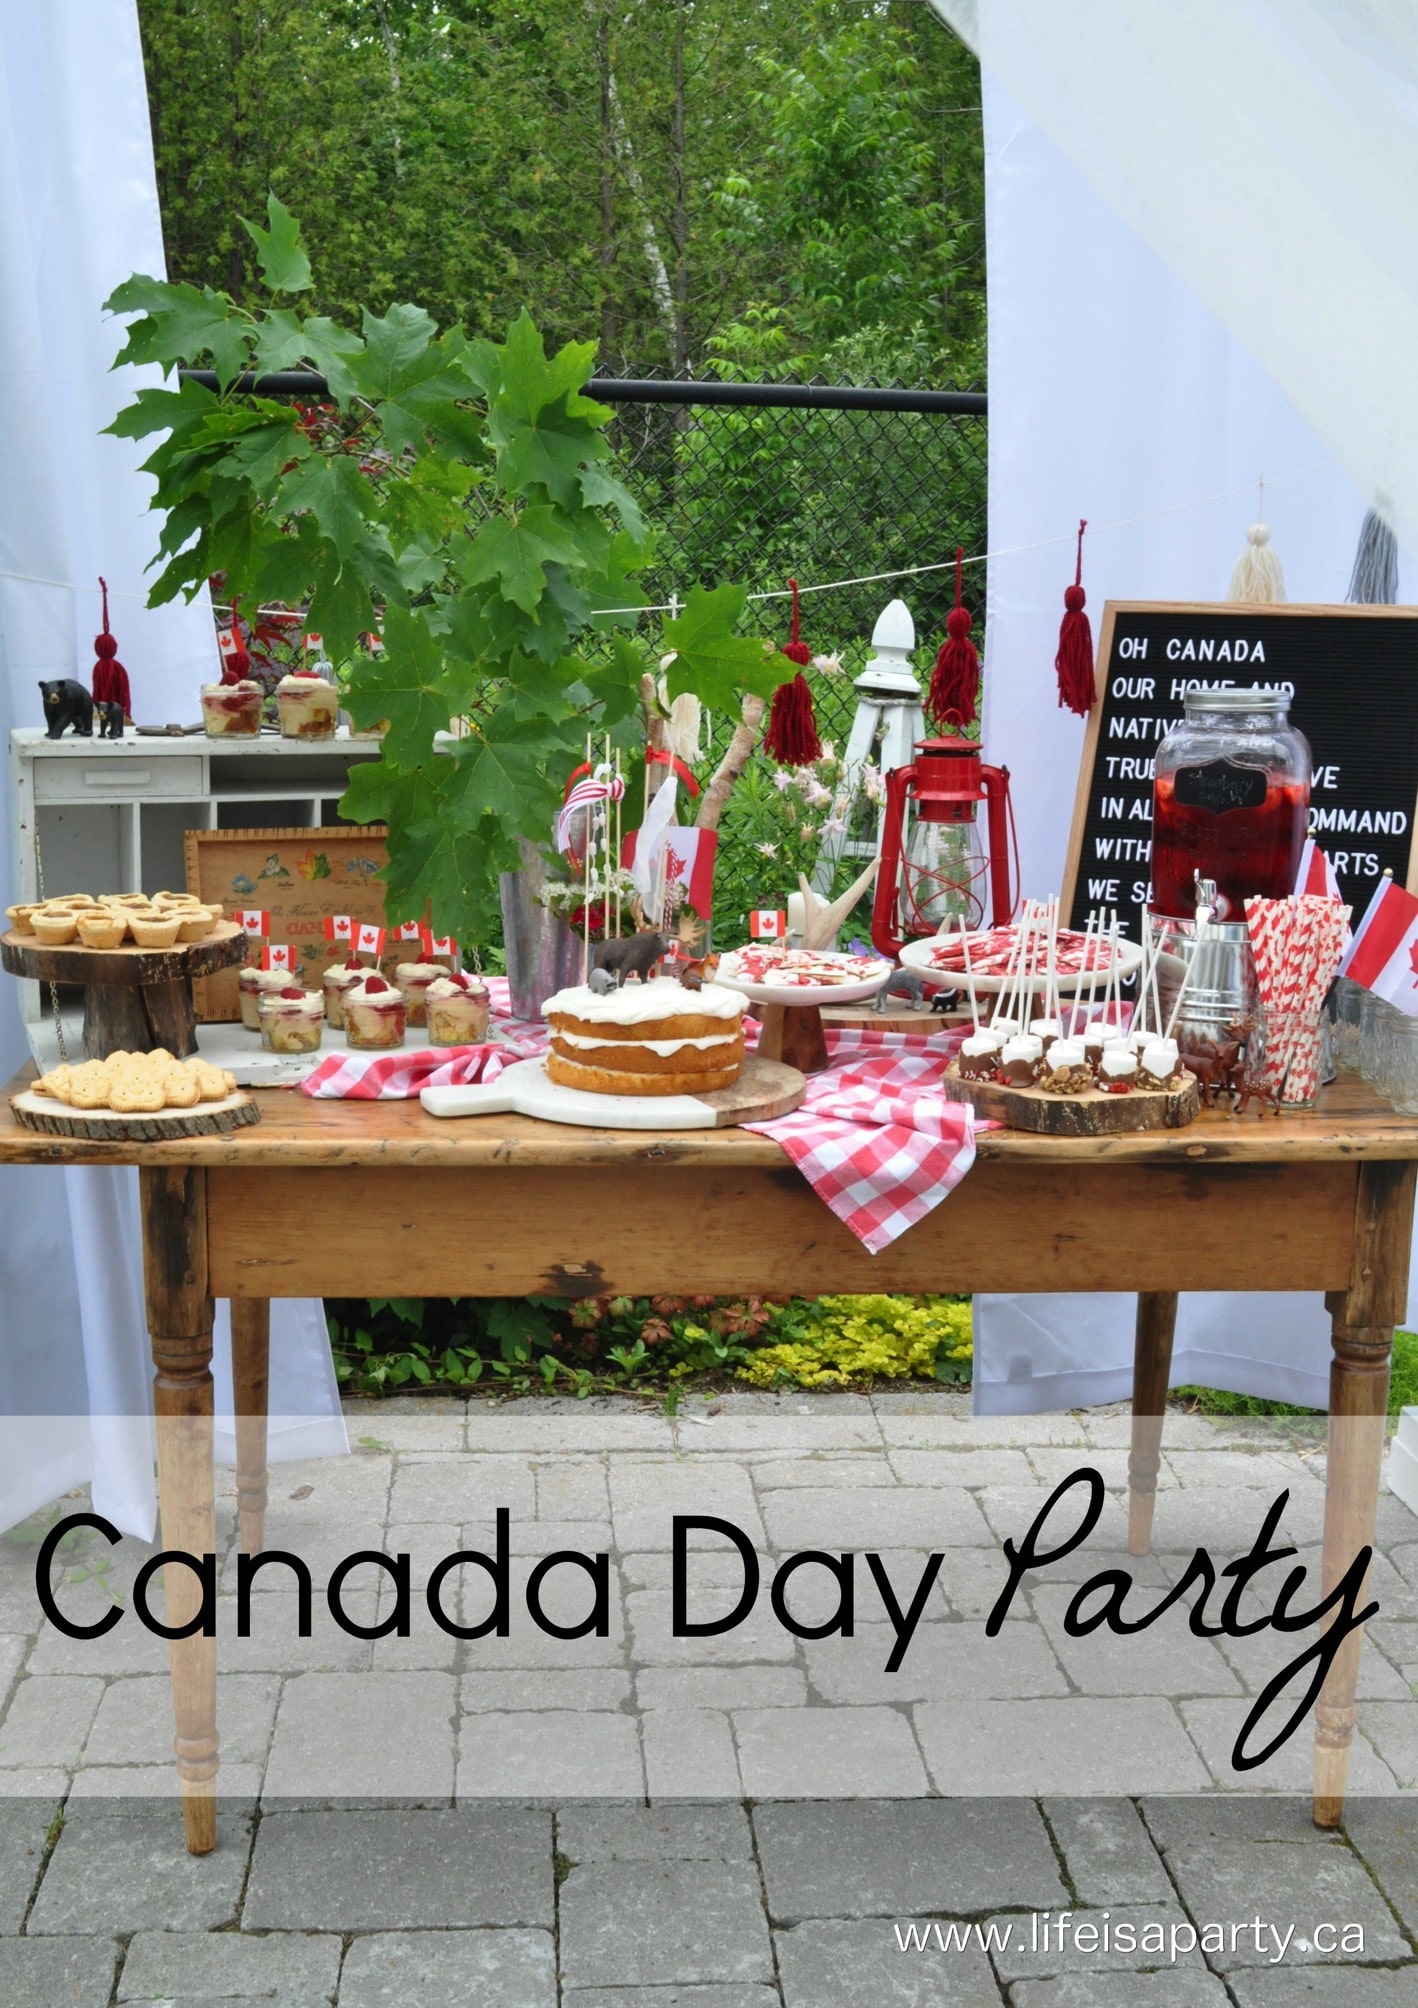 Canada Day Party -Classic Canadiana party decor, and Canada themed party desserts that are easy to put together make this the perfect way to celebrate!